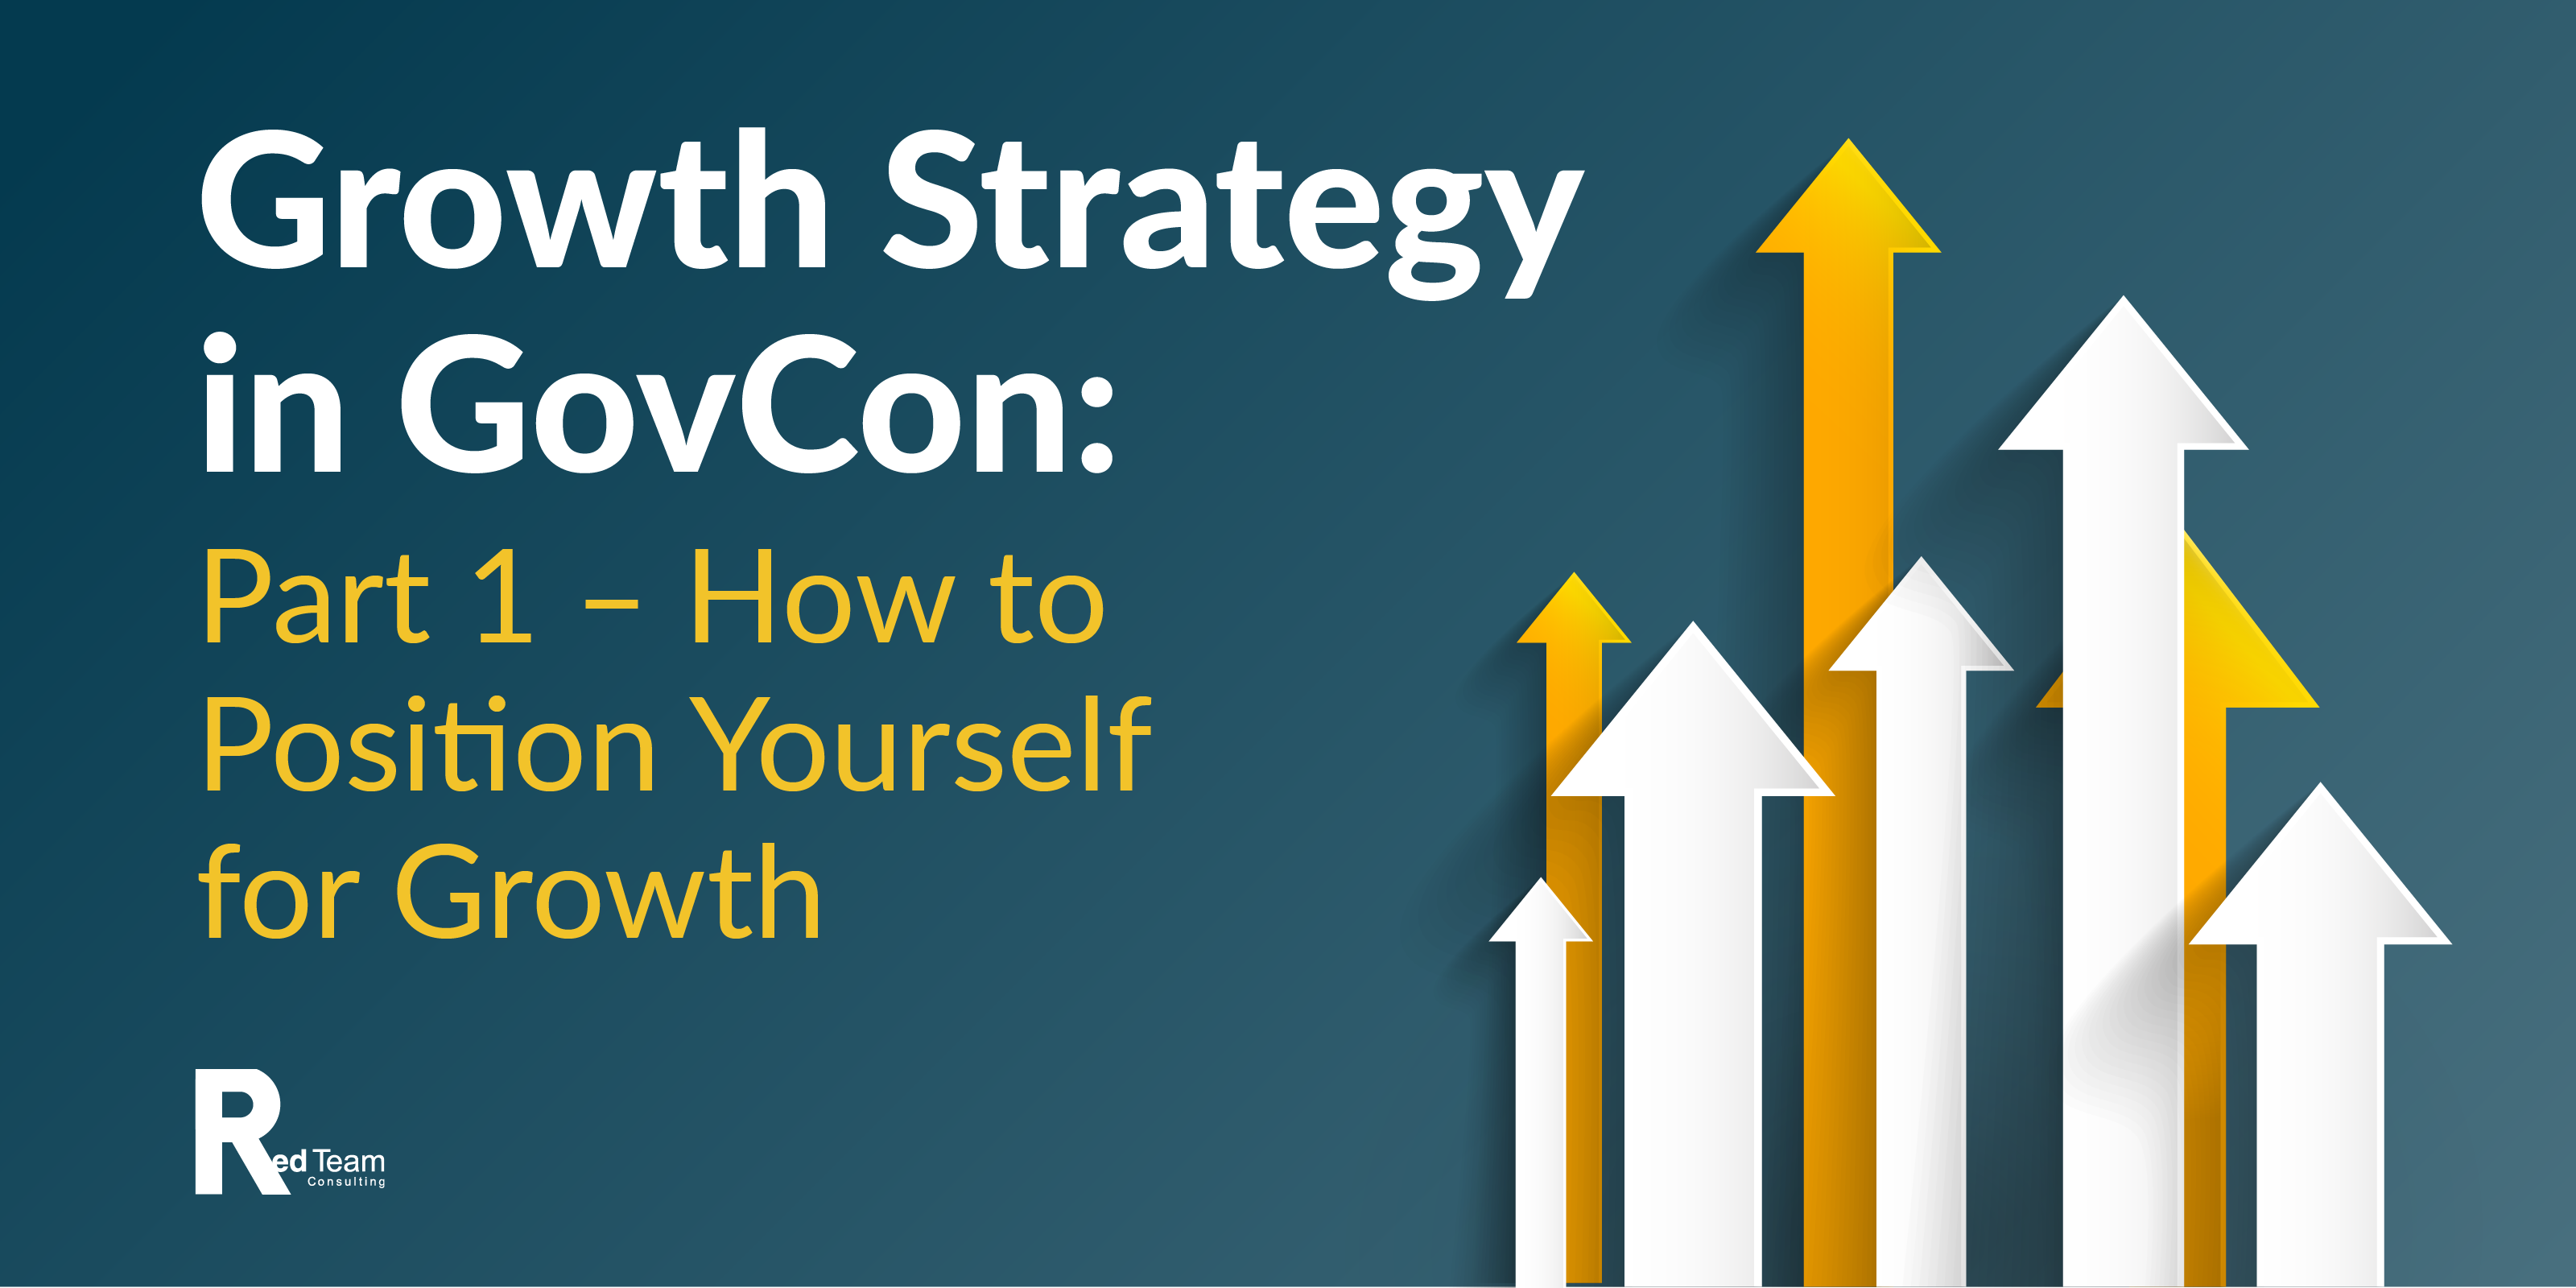 Growth strategy in GovCon